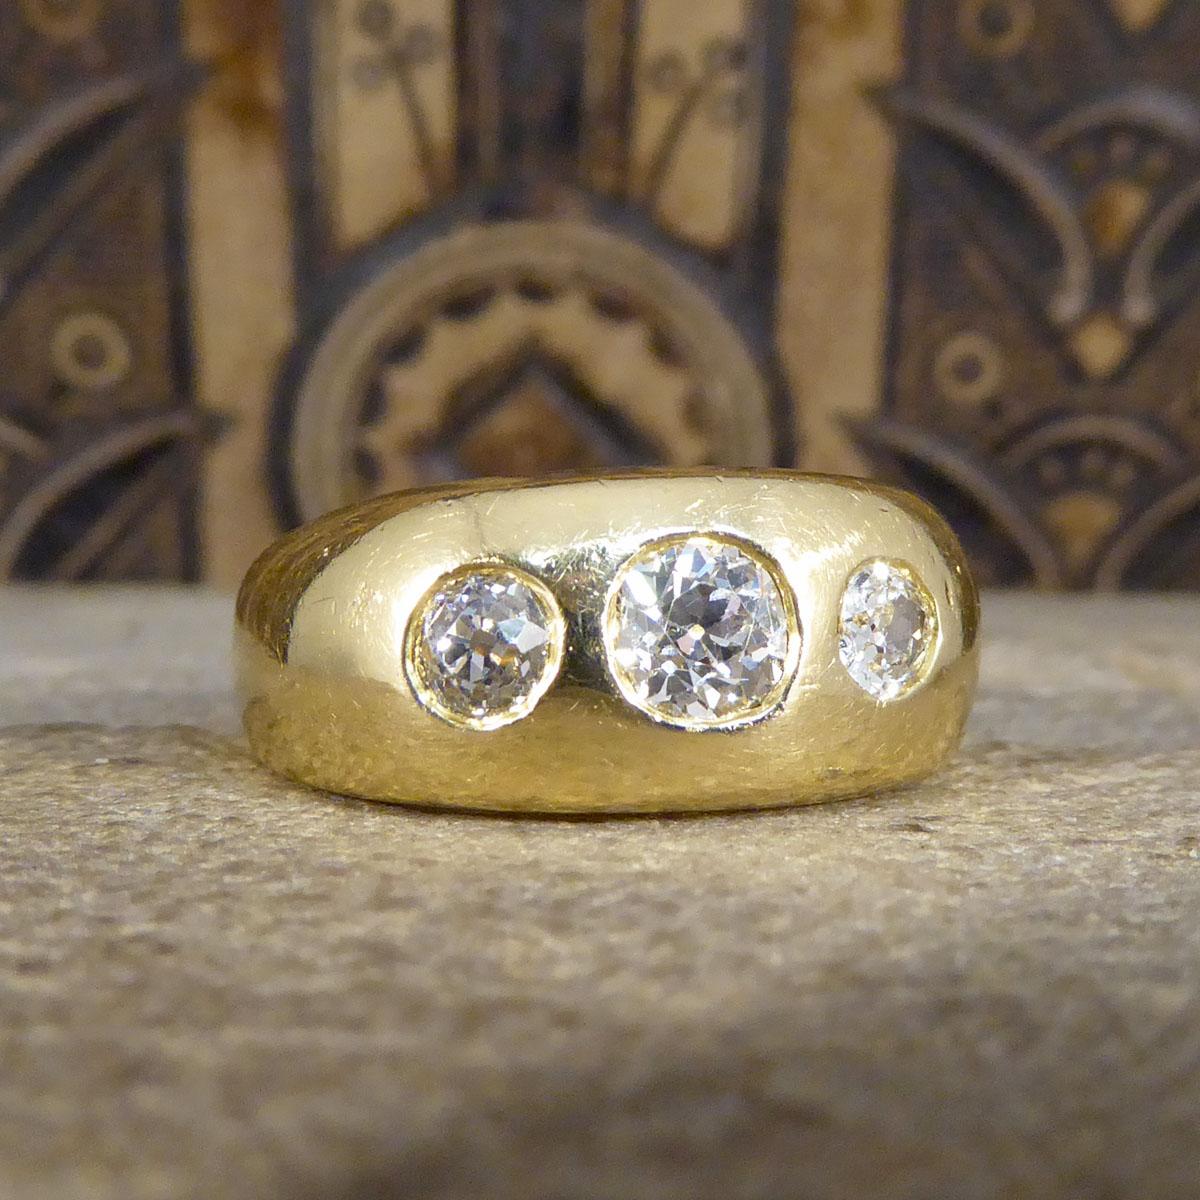 This antique ring has been hand crafted in the Late Victorian era and later fully hallmarked when it has likely been resized, which is why there is a later hallmark on the inner band. This gorgeous heavy quality three stone Diamond gypsy ring has a